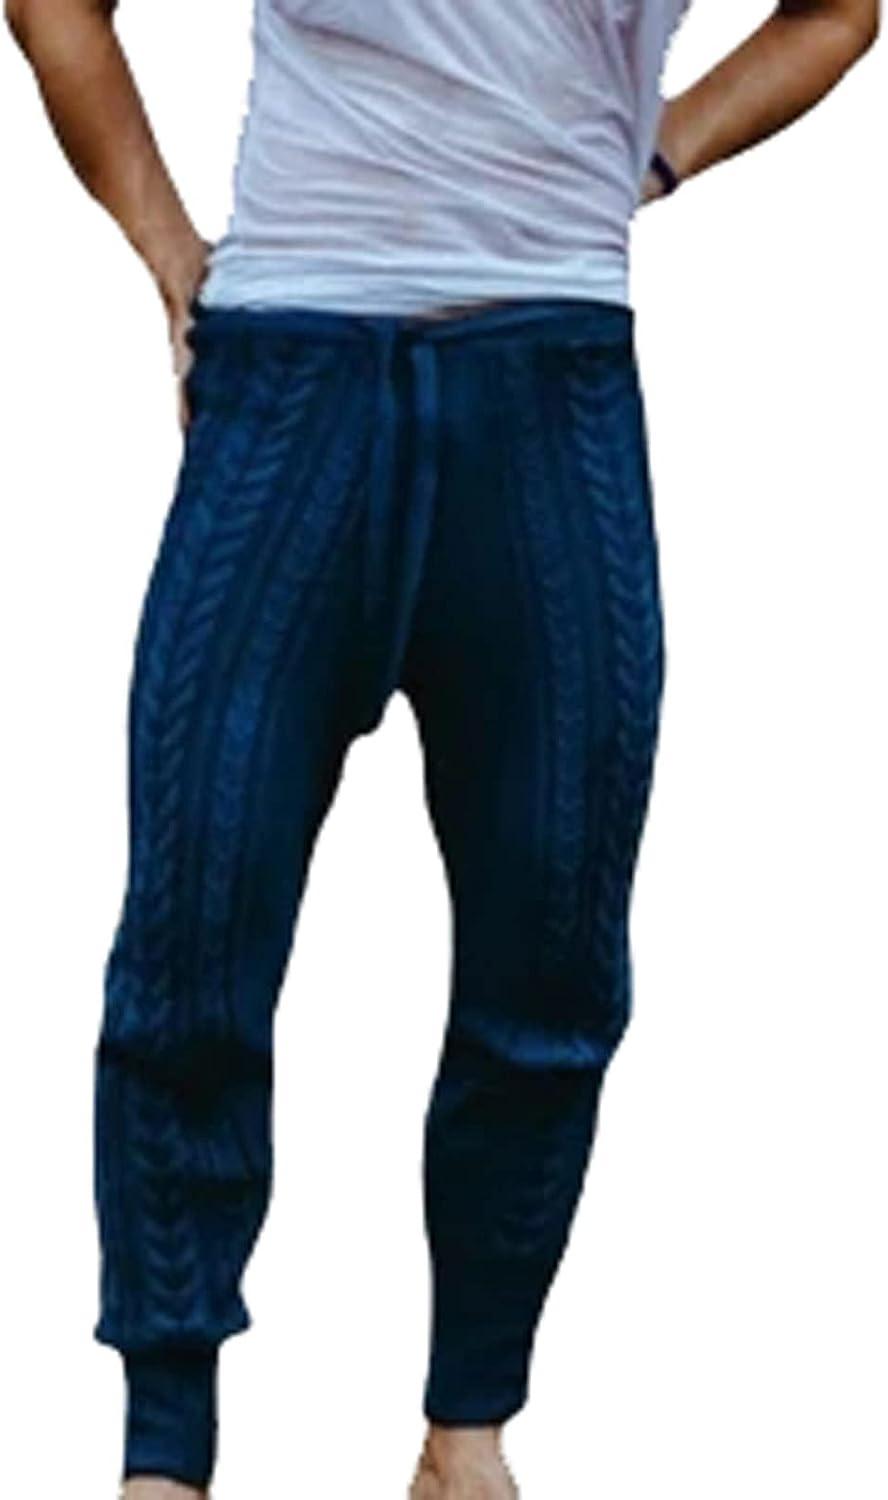 Mens Solid Chunky Cable Knit Warm Pants Drawstring Slim Fit Rib Trousers  Elastic Mid Rise Cinch Bottom Jersey Pants Blue Large